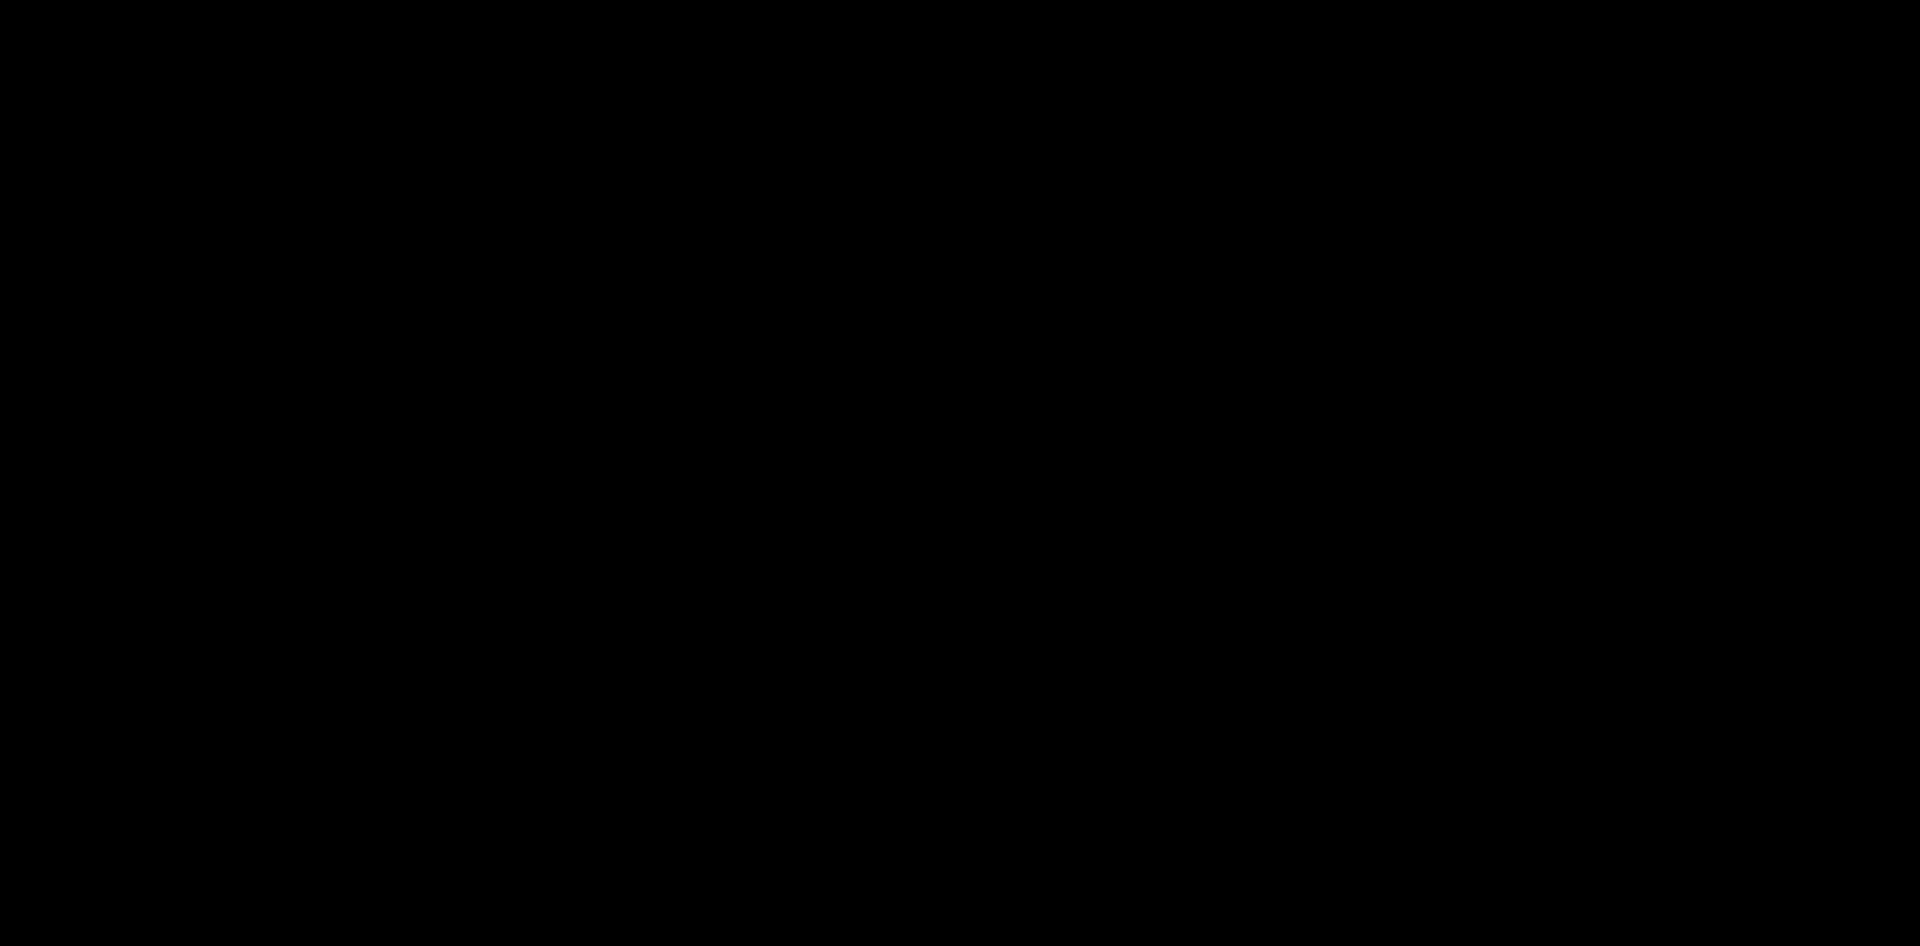 Black Screen No Image Available.jpg PNG